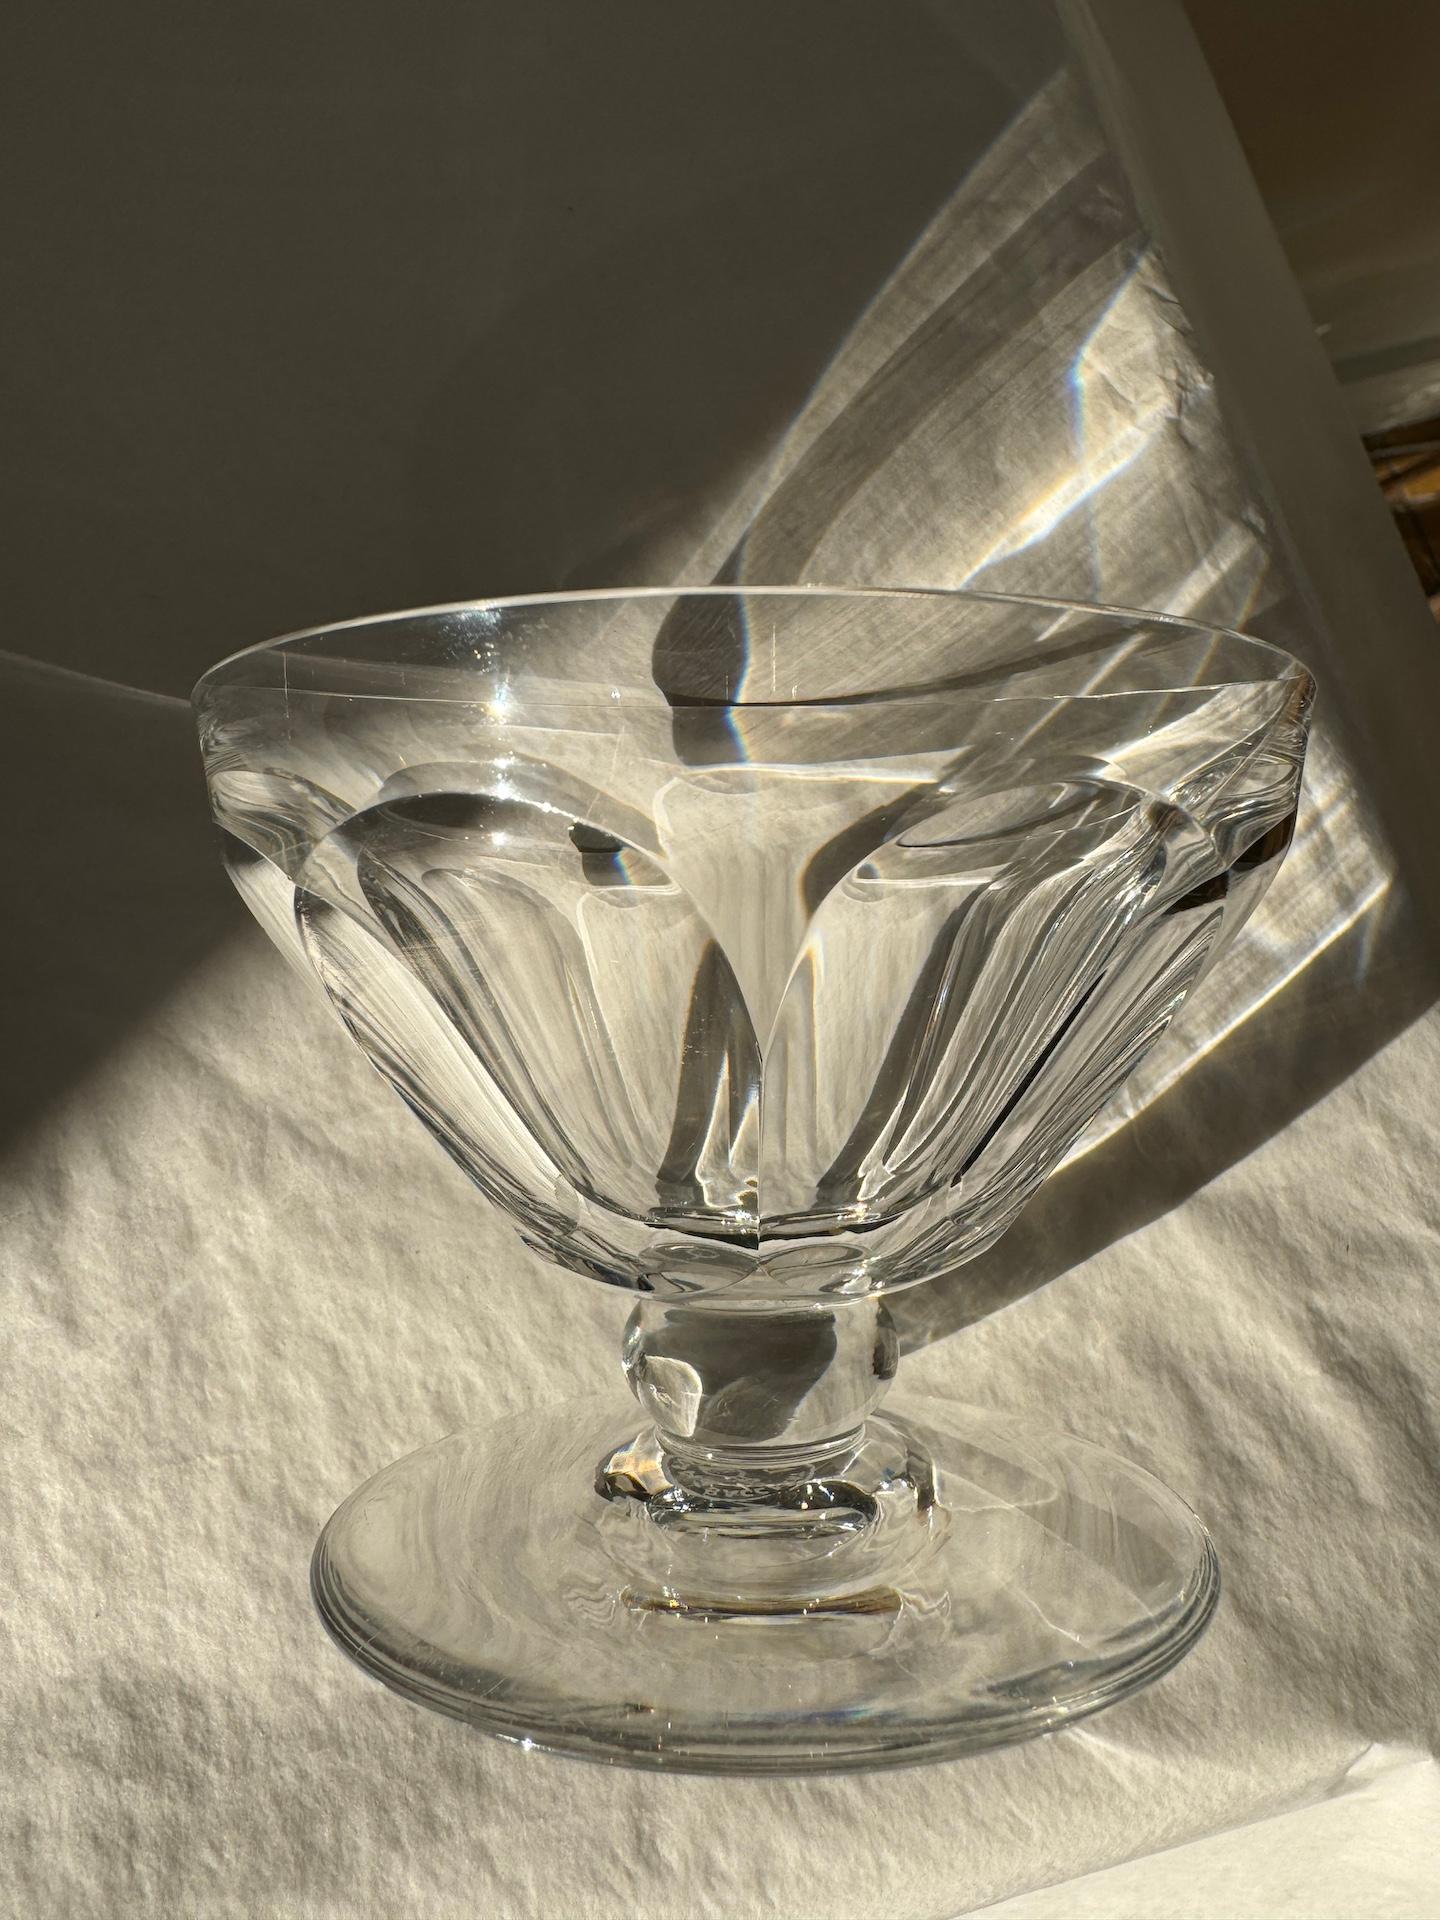 8 Baccarat Crystal Champagne or Cocktail Glasses, Talleyrand Model, Art Deco Era For Sale 1